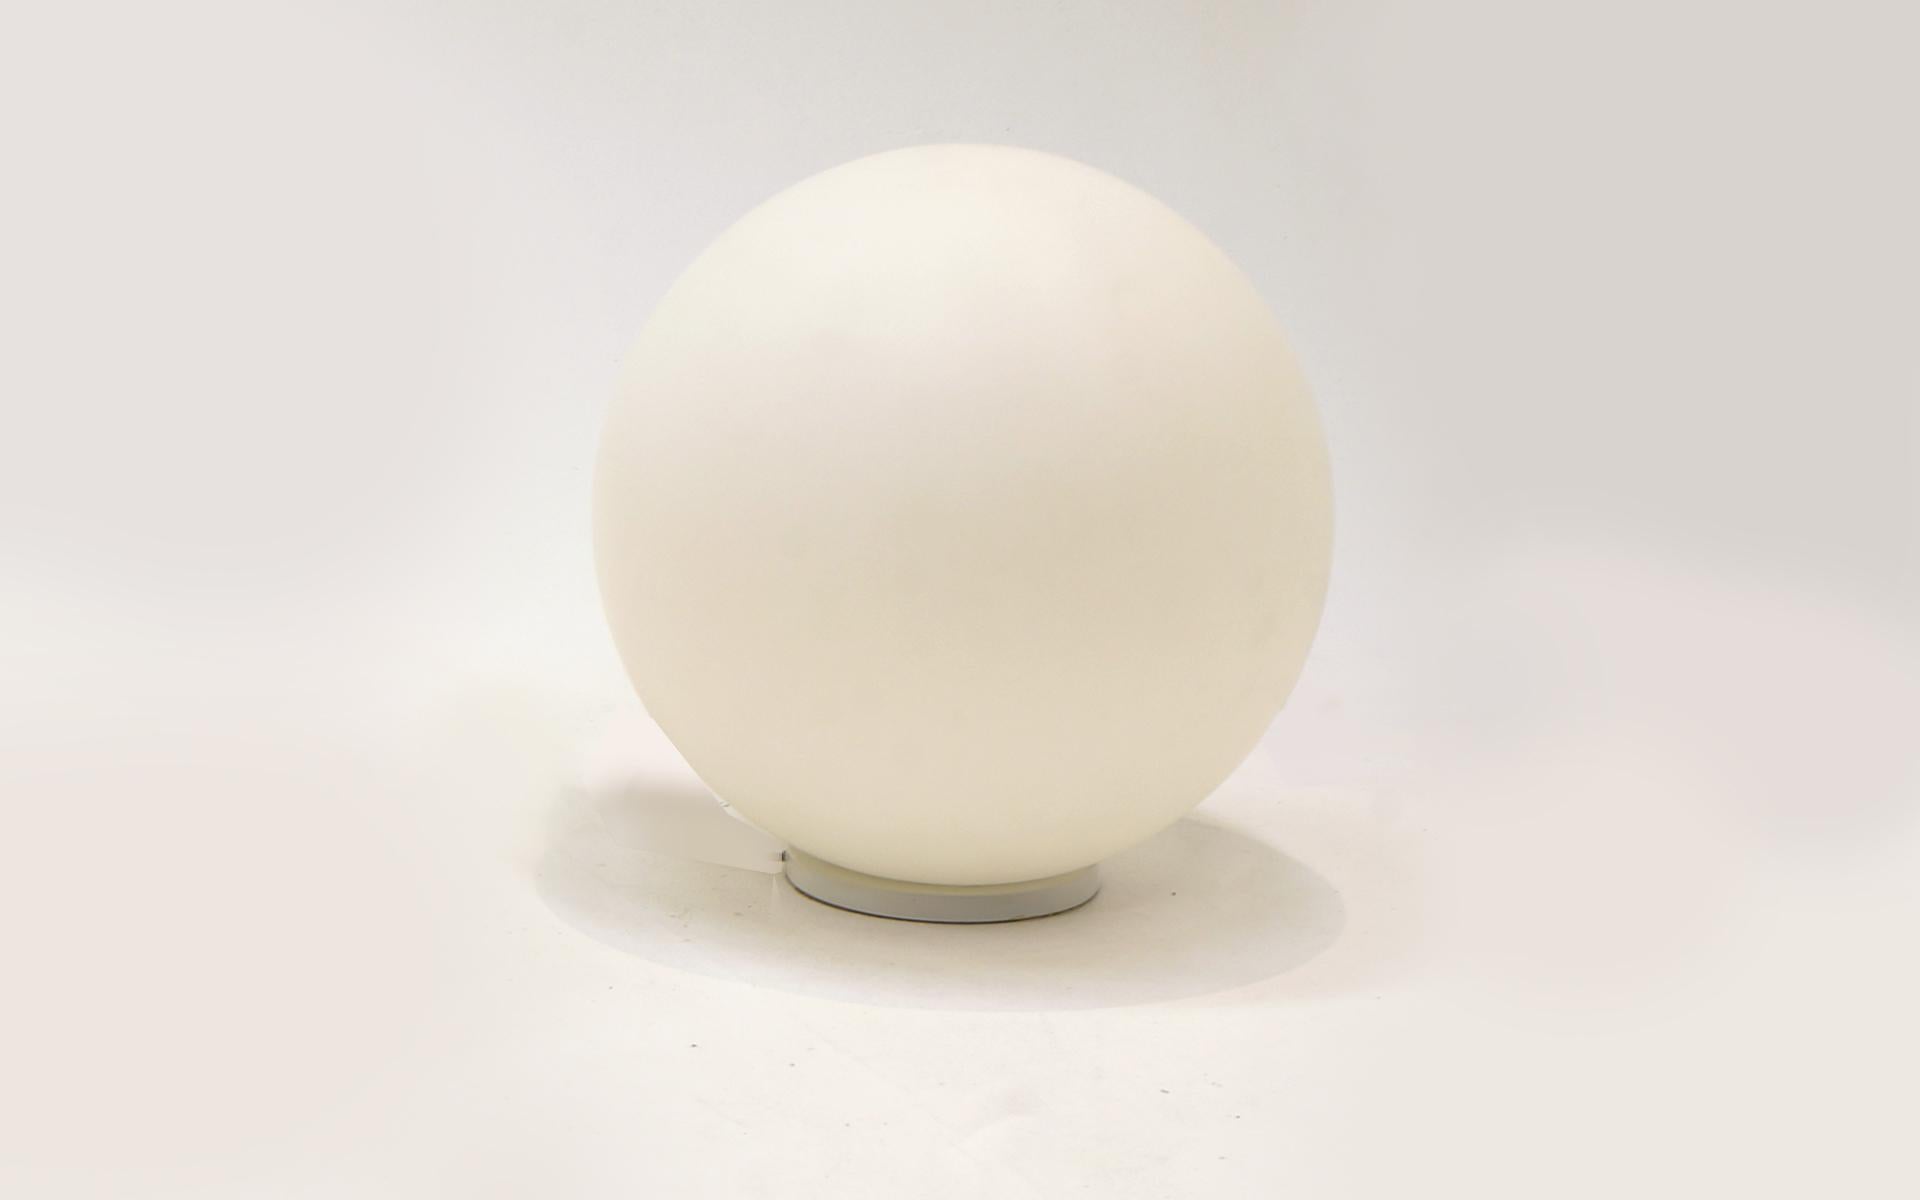 Italian round glass globe light. Big enough to be used as a floor lamp or as a table lamp. Glass is excellent with no chips and a few signs of wear to the white finish upon close inspection. Original heavy duty base and American wiring.